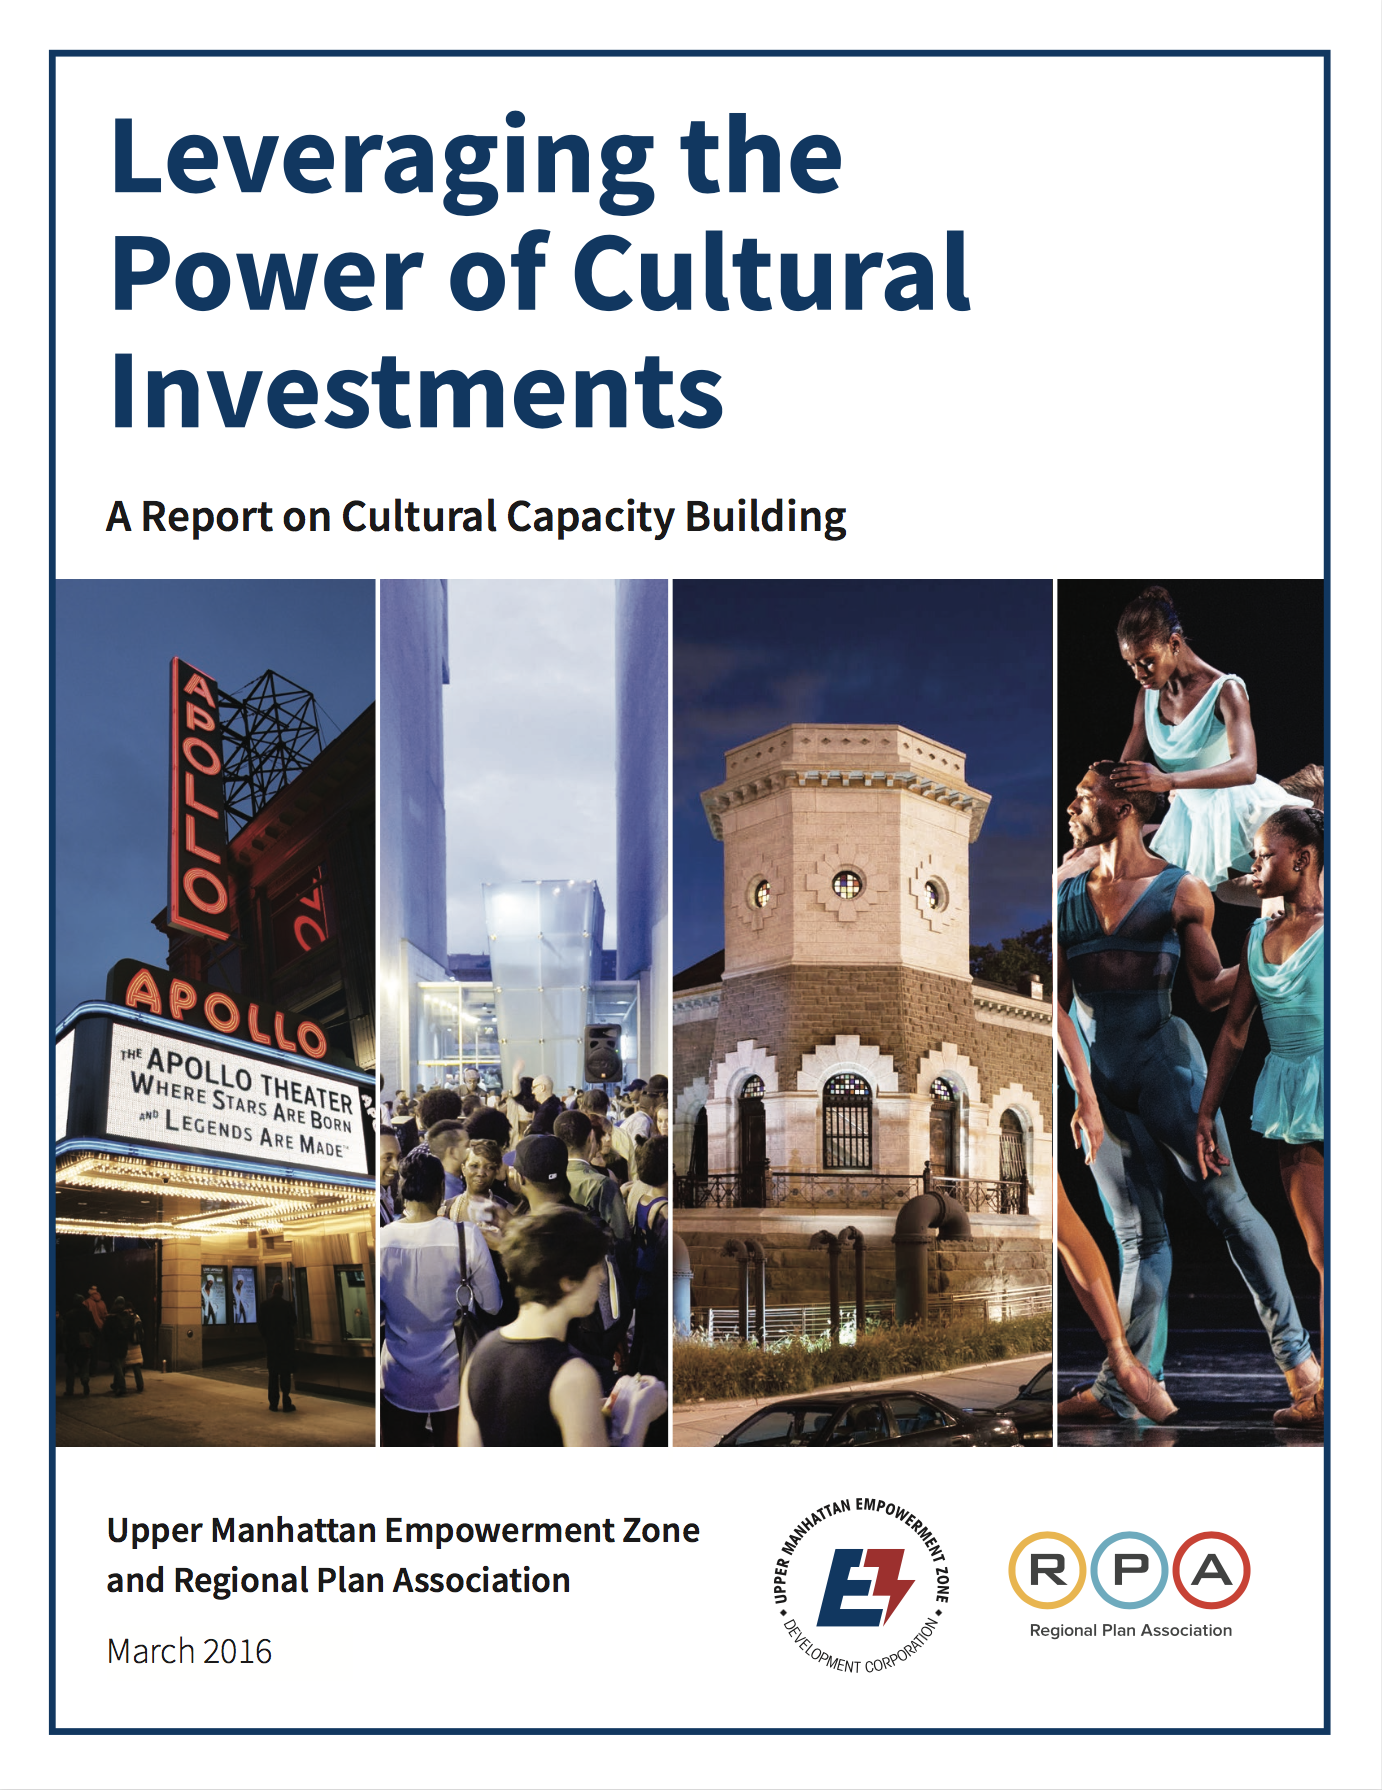 Leveraging the Power of Cultural Investments